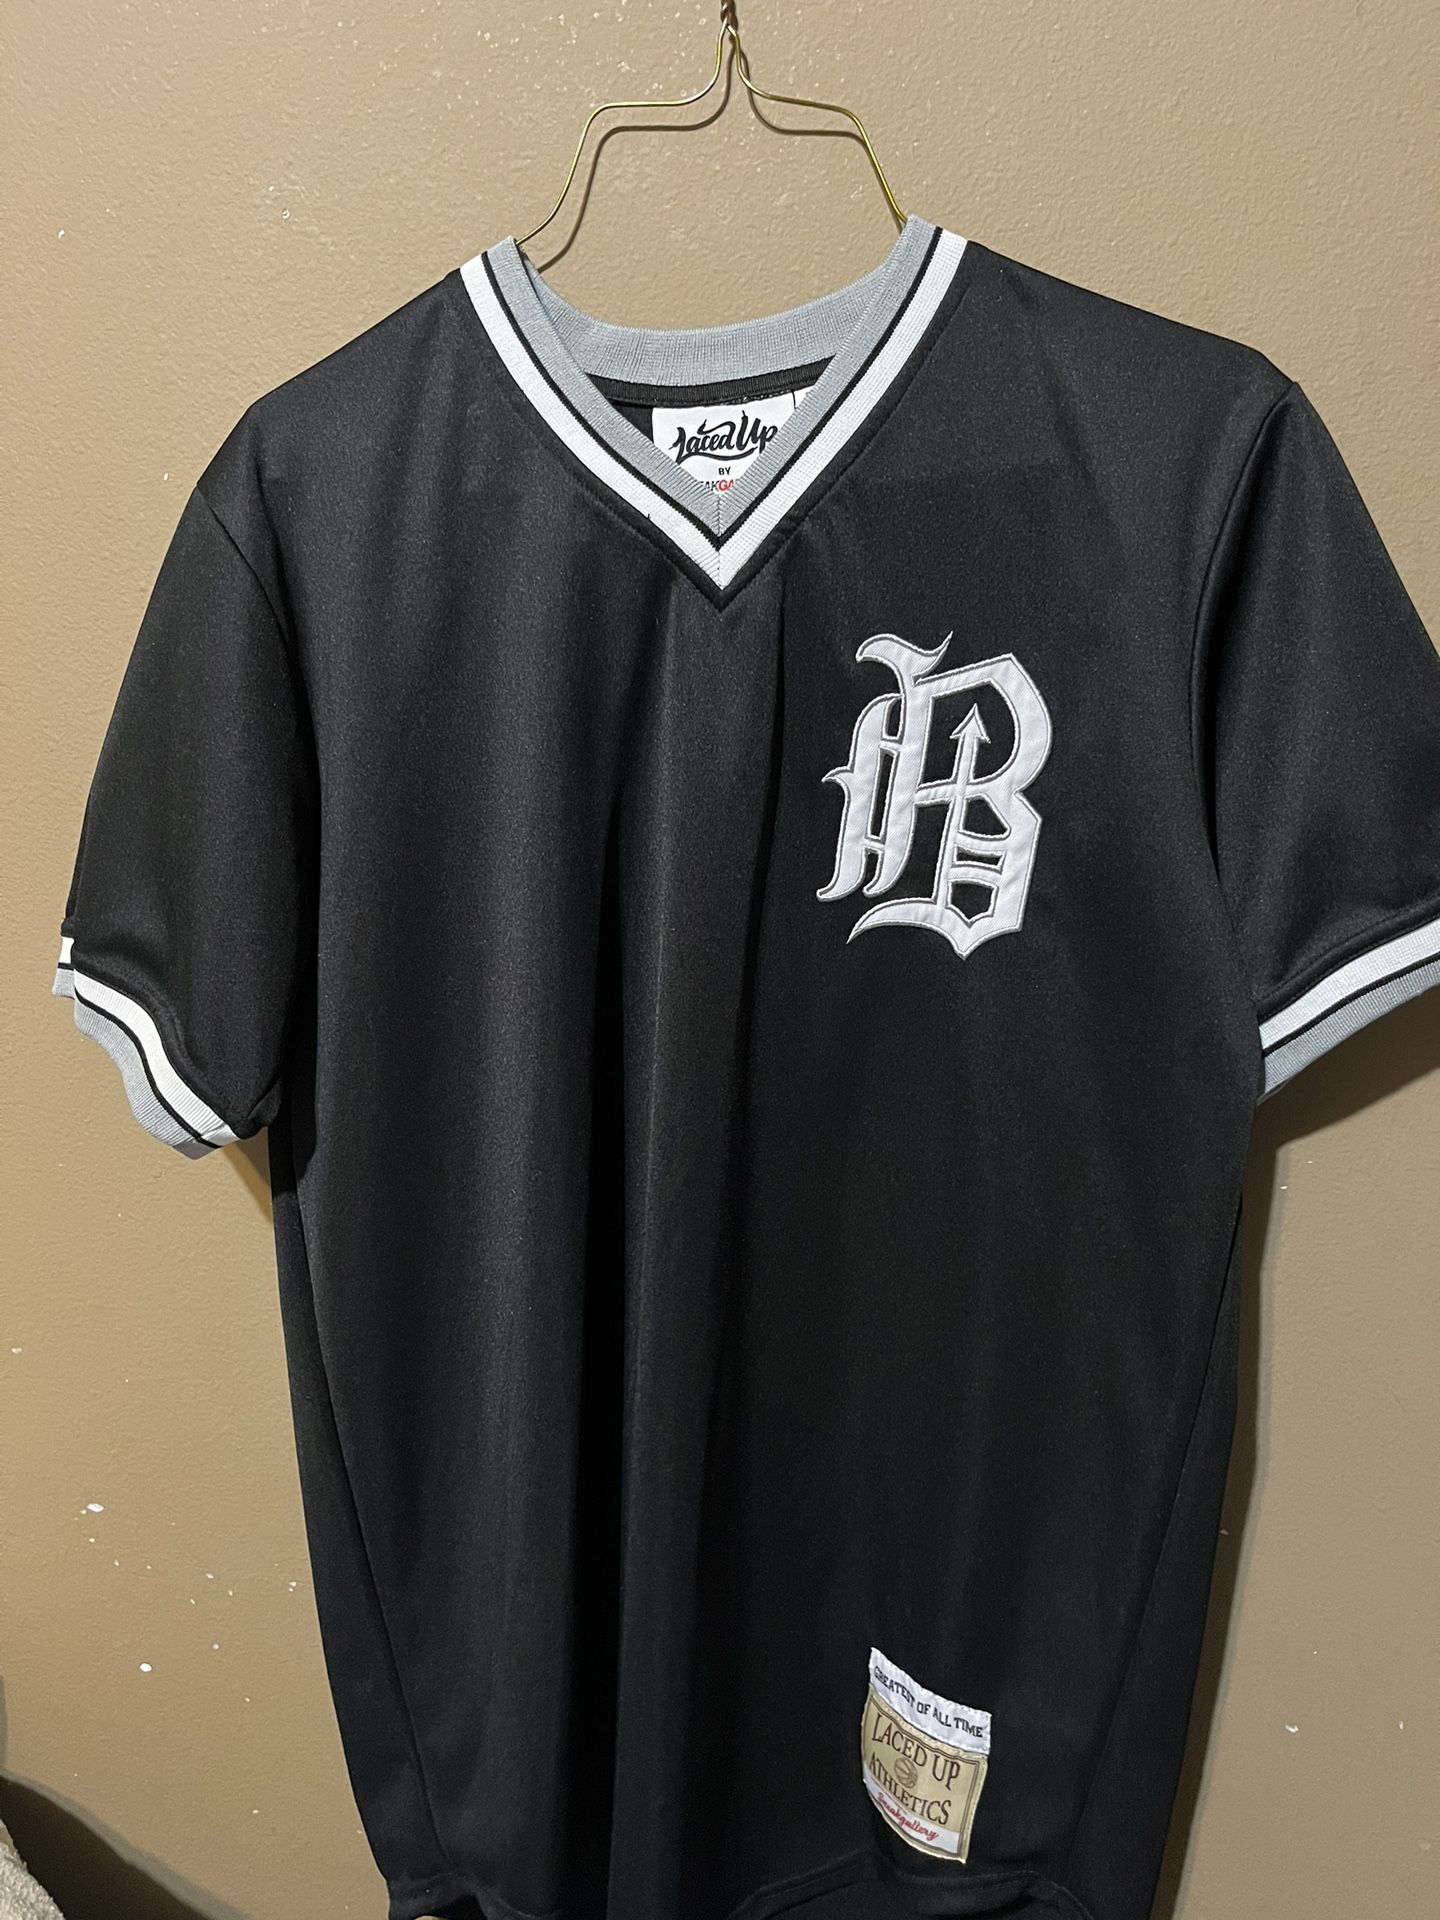 Vintage Barons Jersey